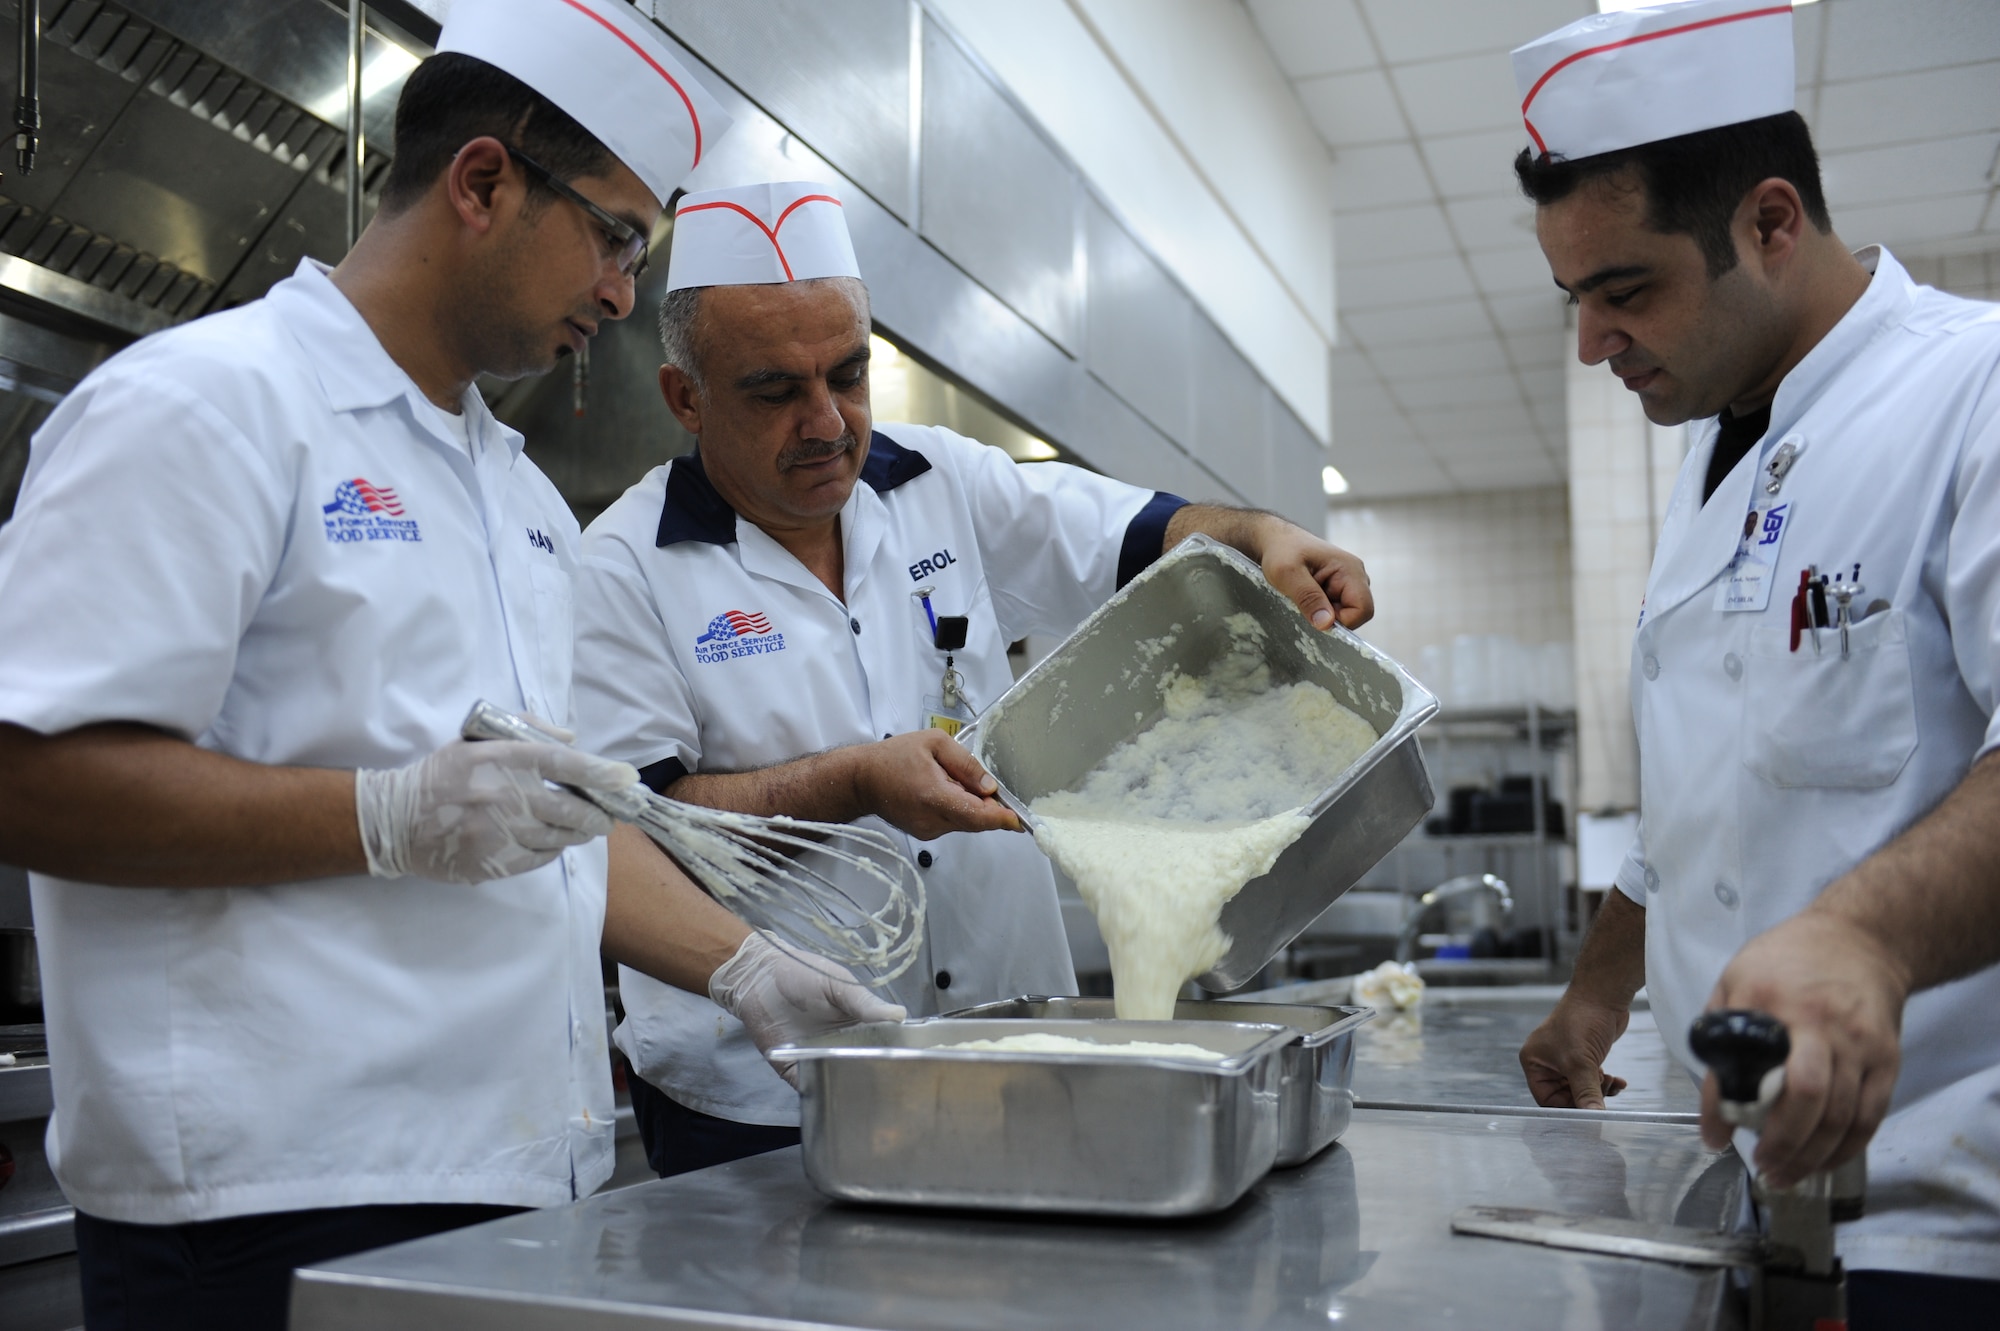 Harun Adiguzel, (left) 39th Force Support Squadron food services helper, Erol Kahveci (middle) 39th FSS cook and Ali Karsli 39th FSS senior cook, pour mashed potatoes while preparing lunch July 27, 2012 at the  Sultan's Inn Dining Facility at Incirlik Air Base, Turkey. The facility offers a main line a short order line and a variety of made-to-order foods such as sandwiches and chicken at lunch.(U.S. Air Force photo by Senior Airman William A. O'Brien/Released) 